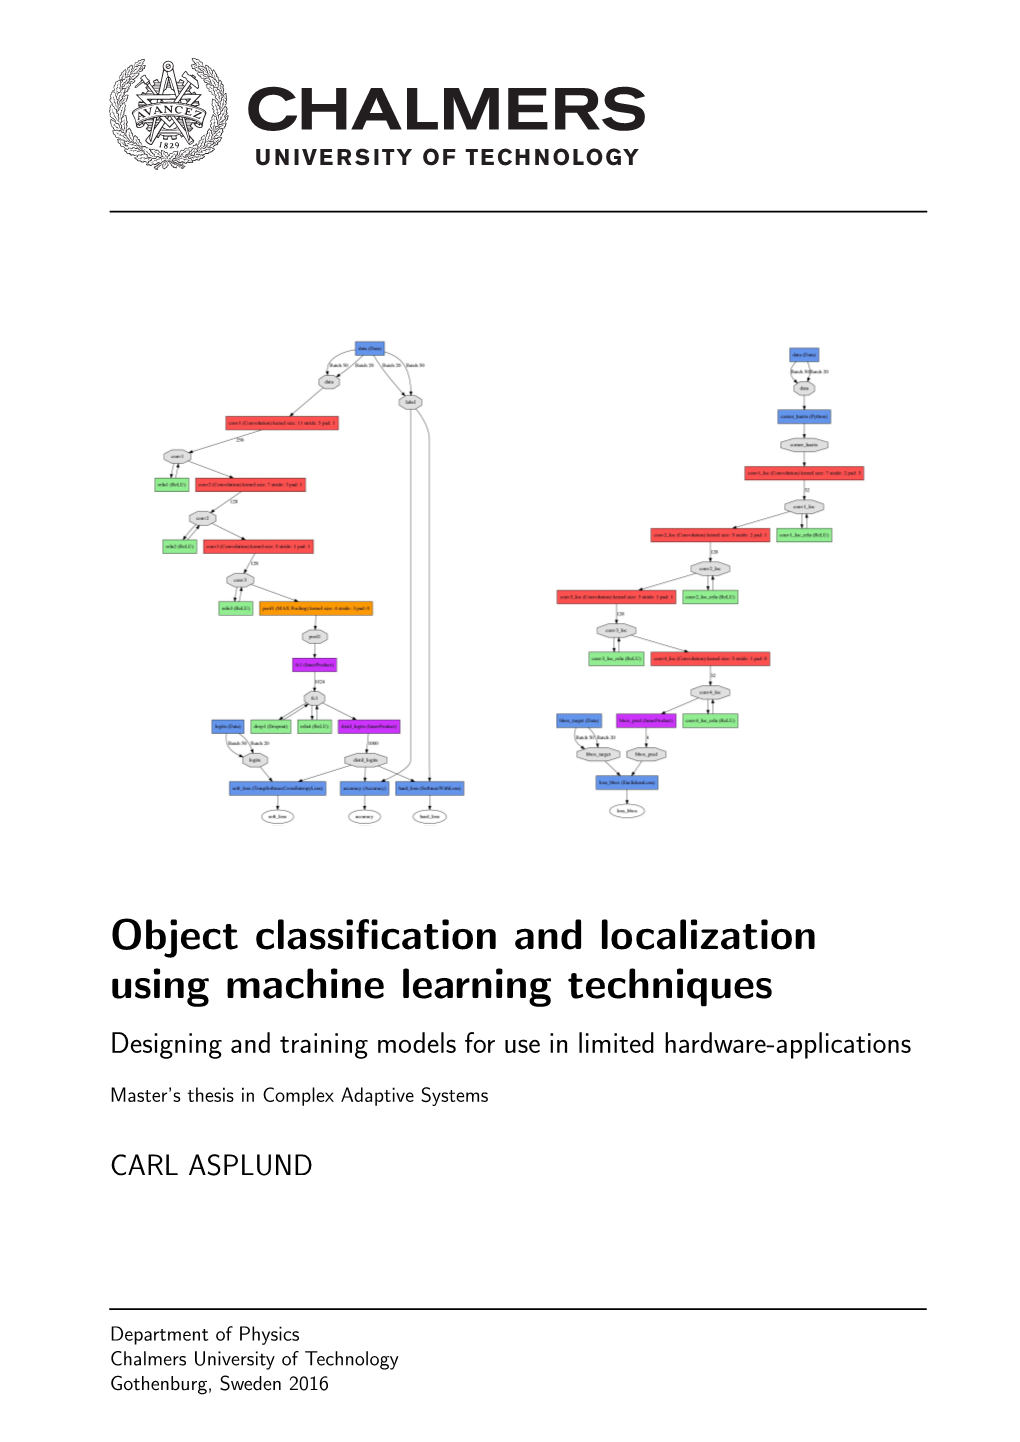 Object Classification and Localization Using Machine Learning Techniques